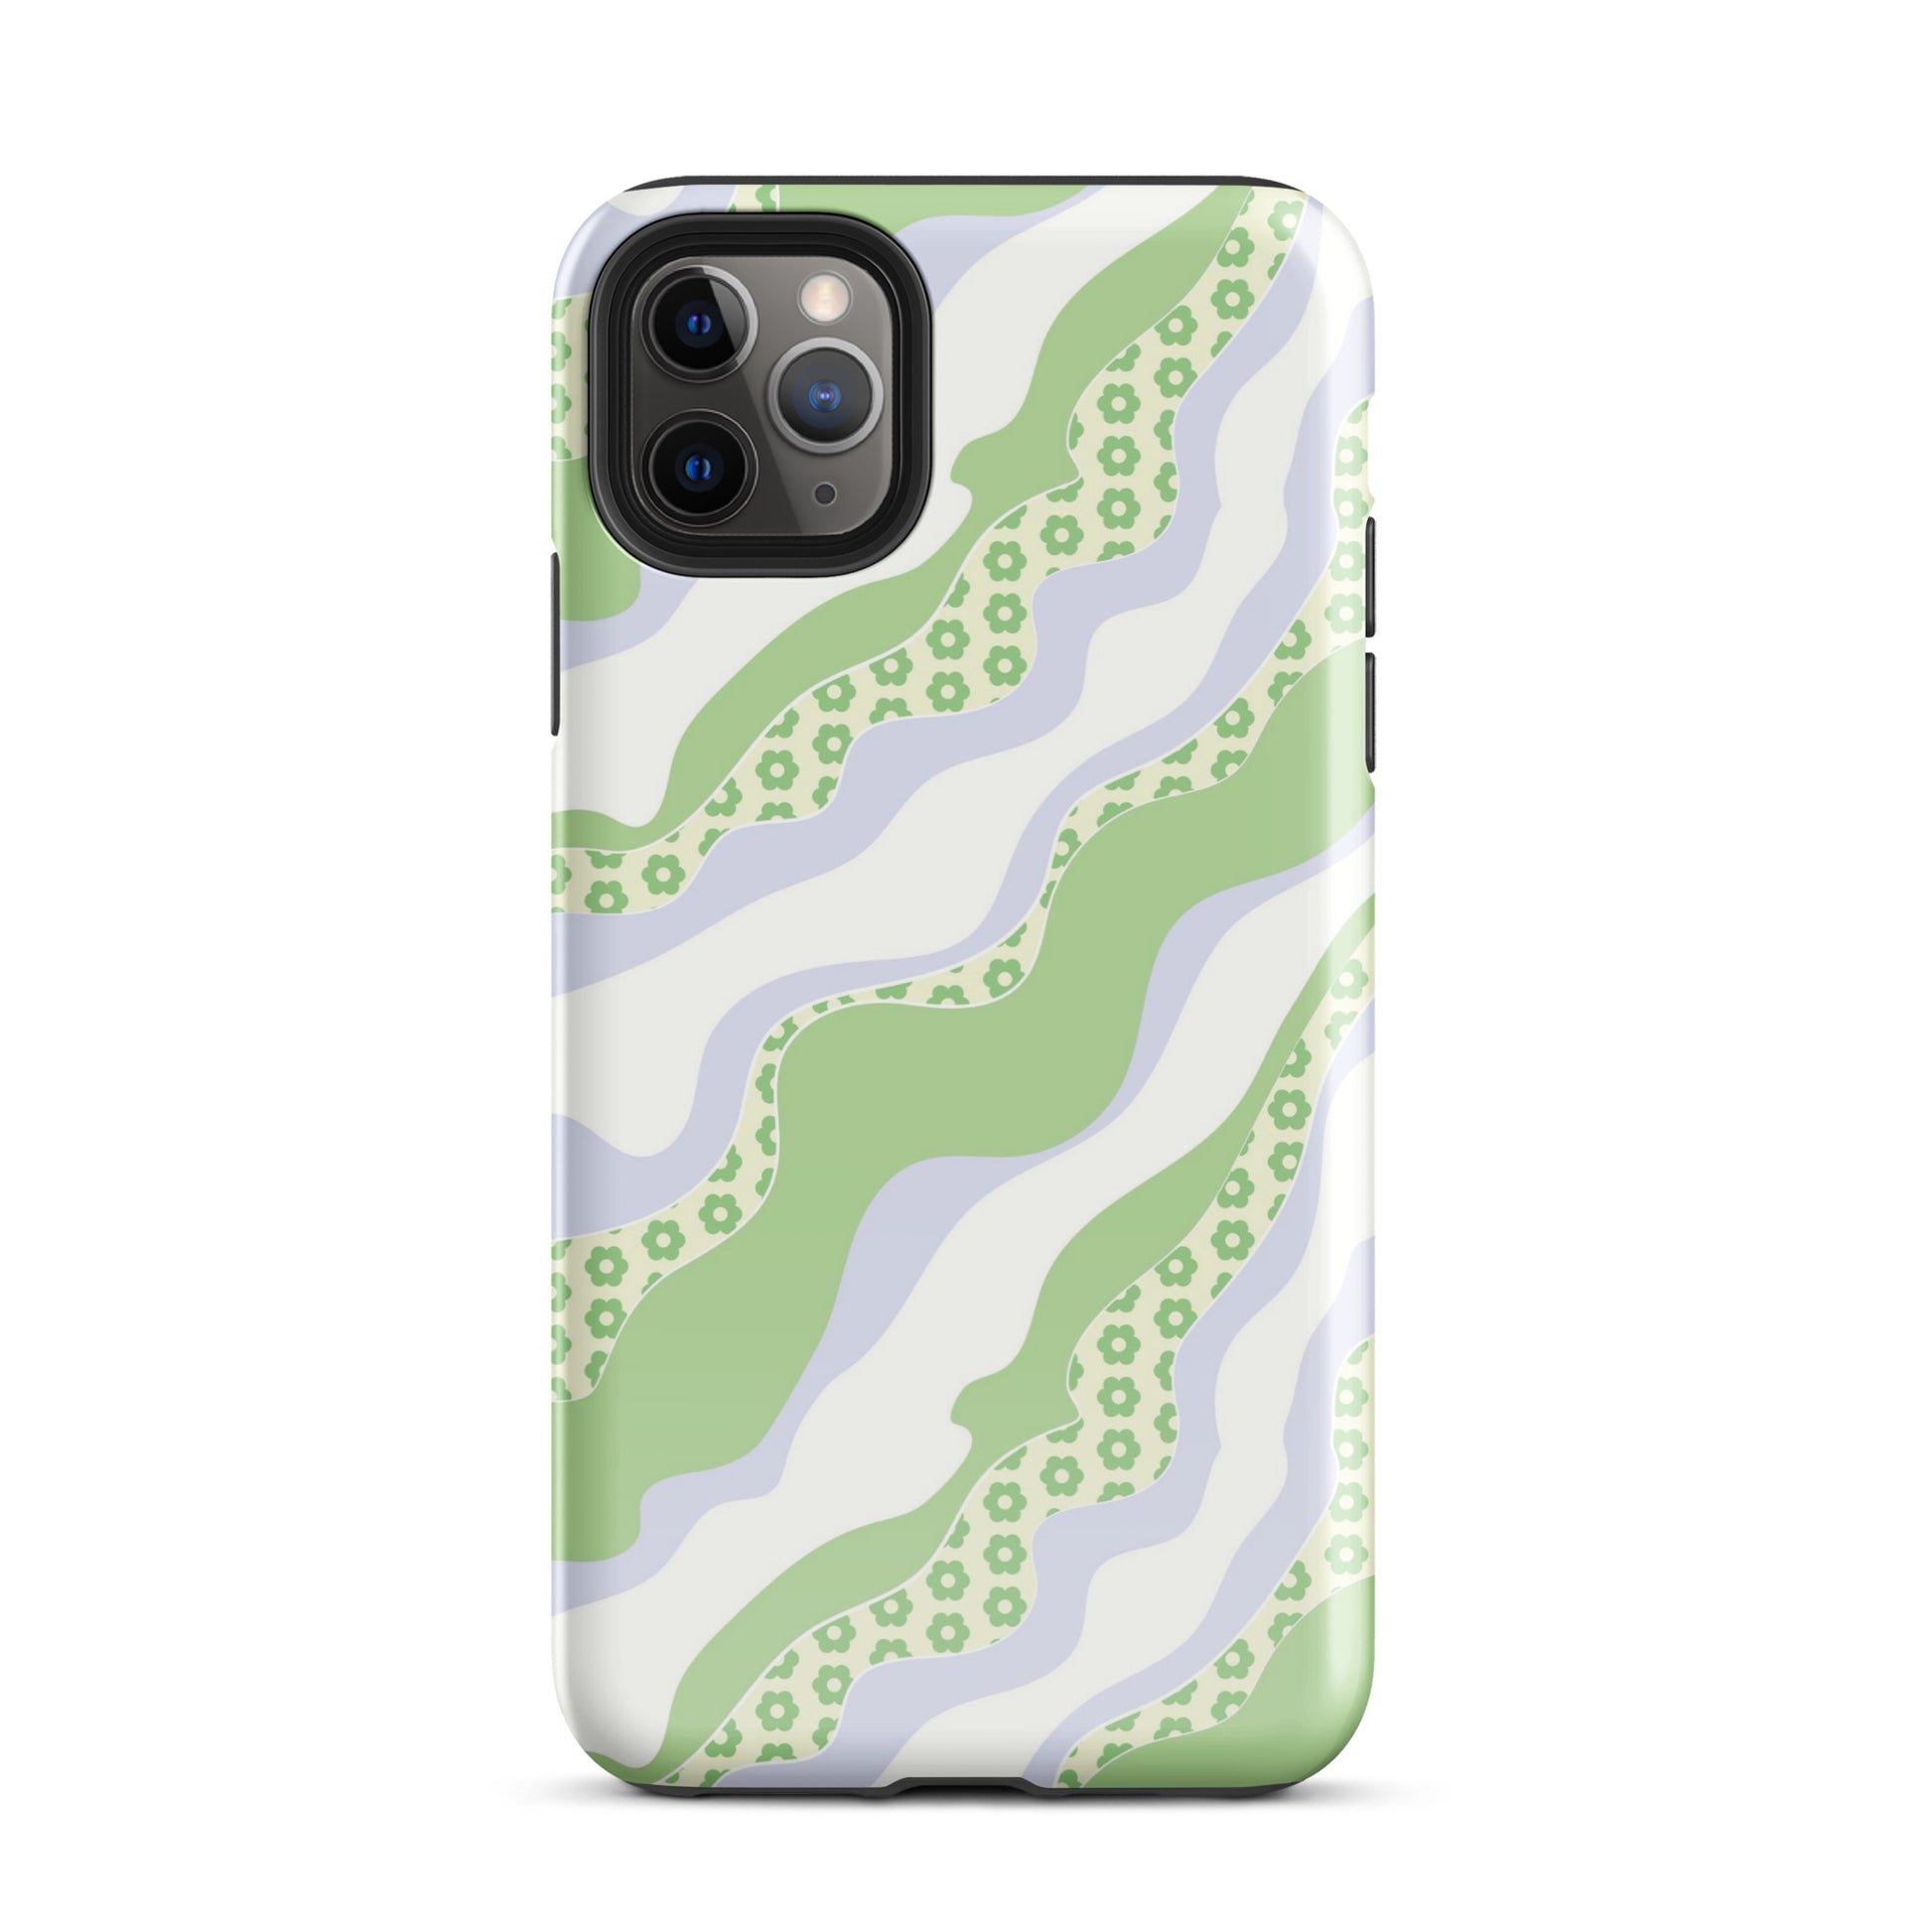 Flower Groove iPhone Case Glossy iPhone 11 Pro Max